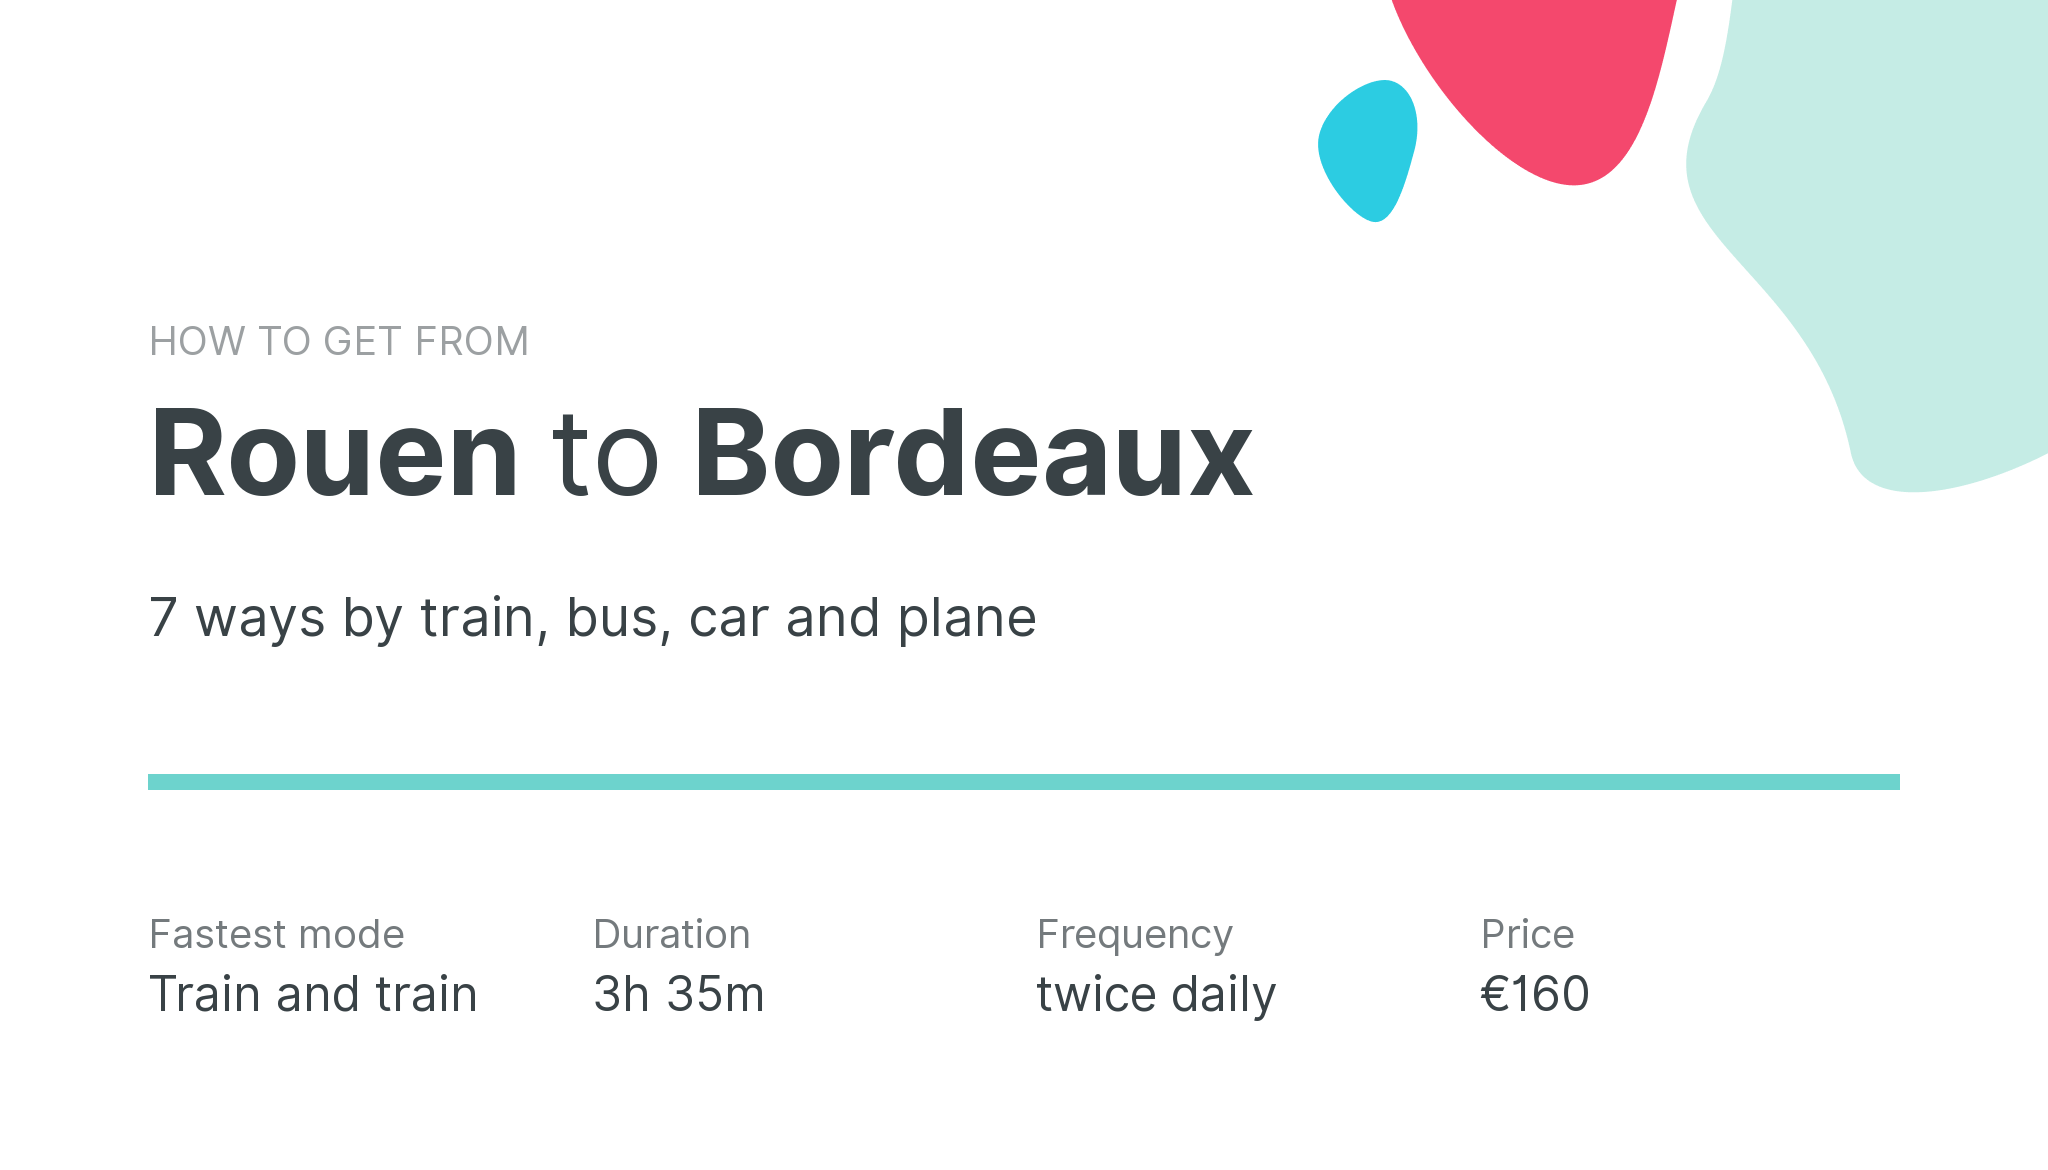 How do I get from Rouen to Bordeaux